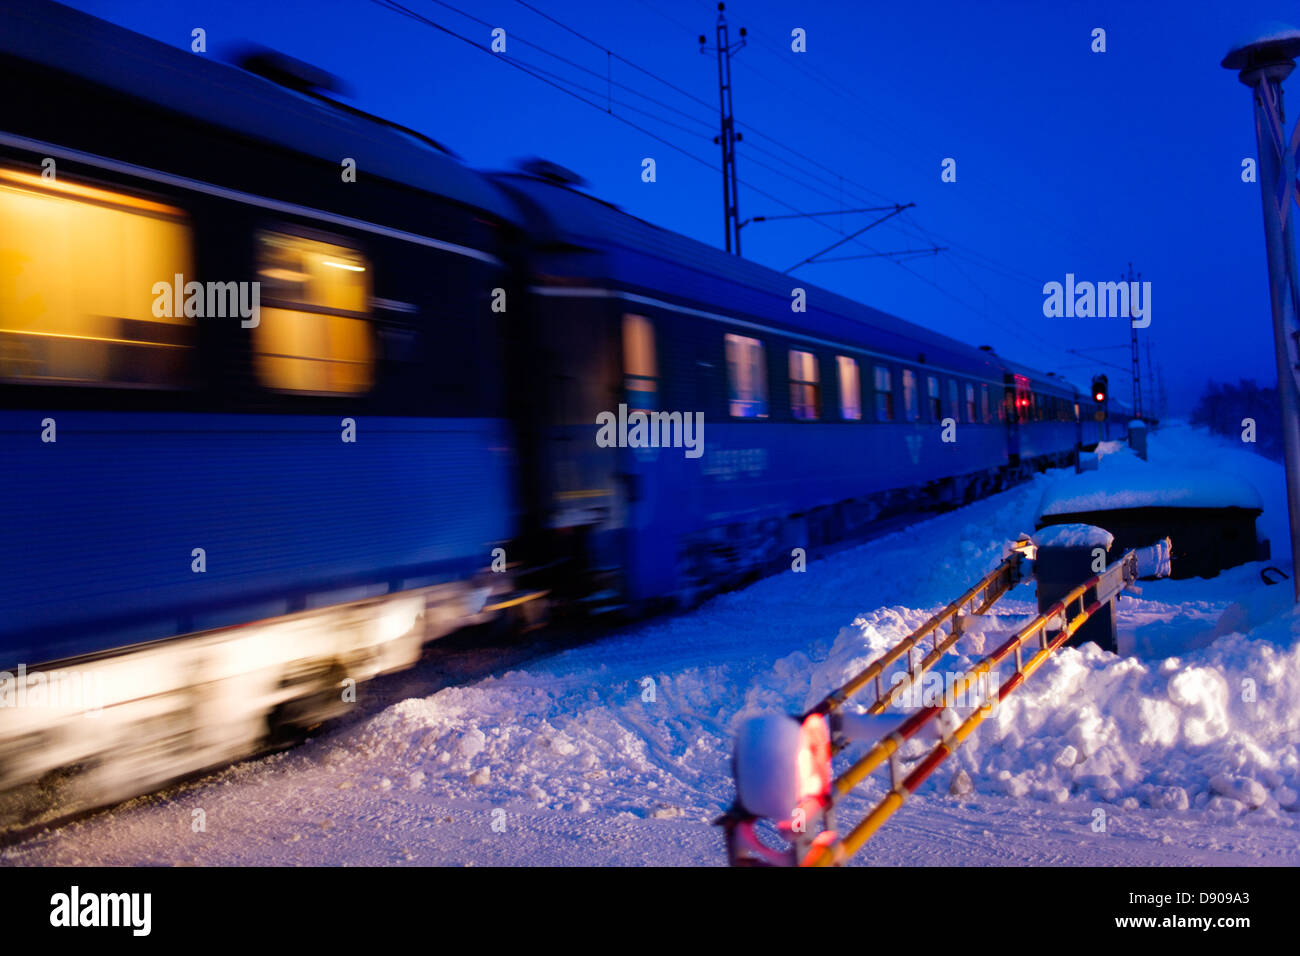 A train in motion at dusk, Sweden. Stock Photo